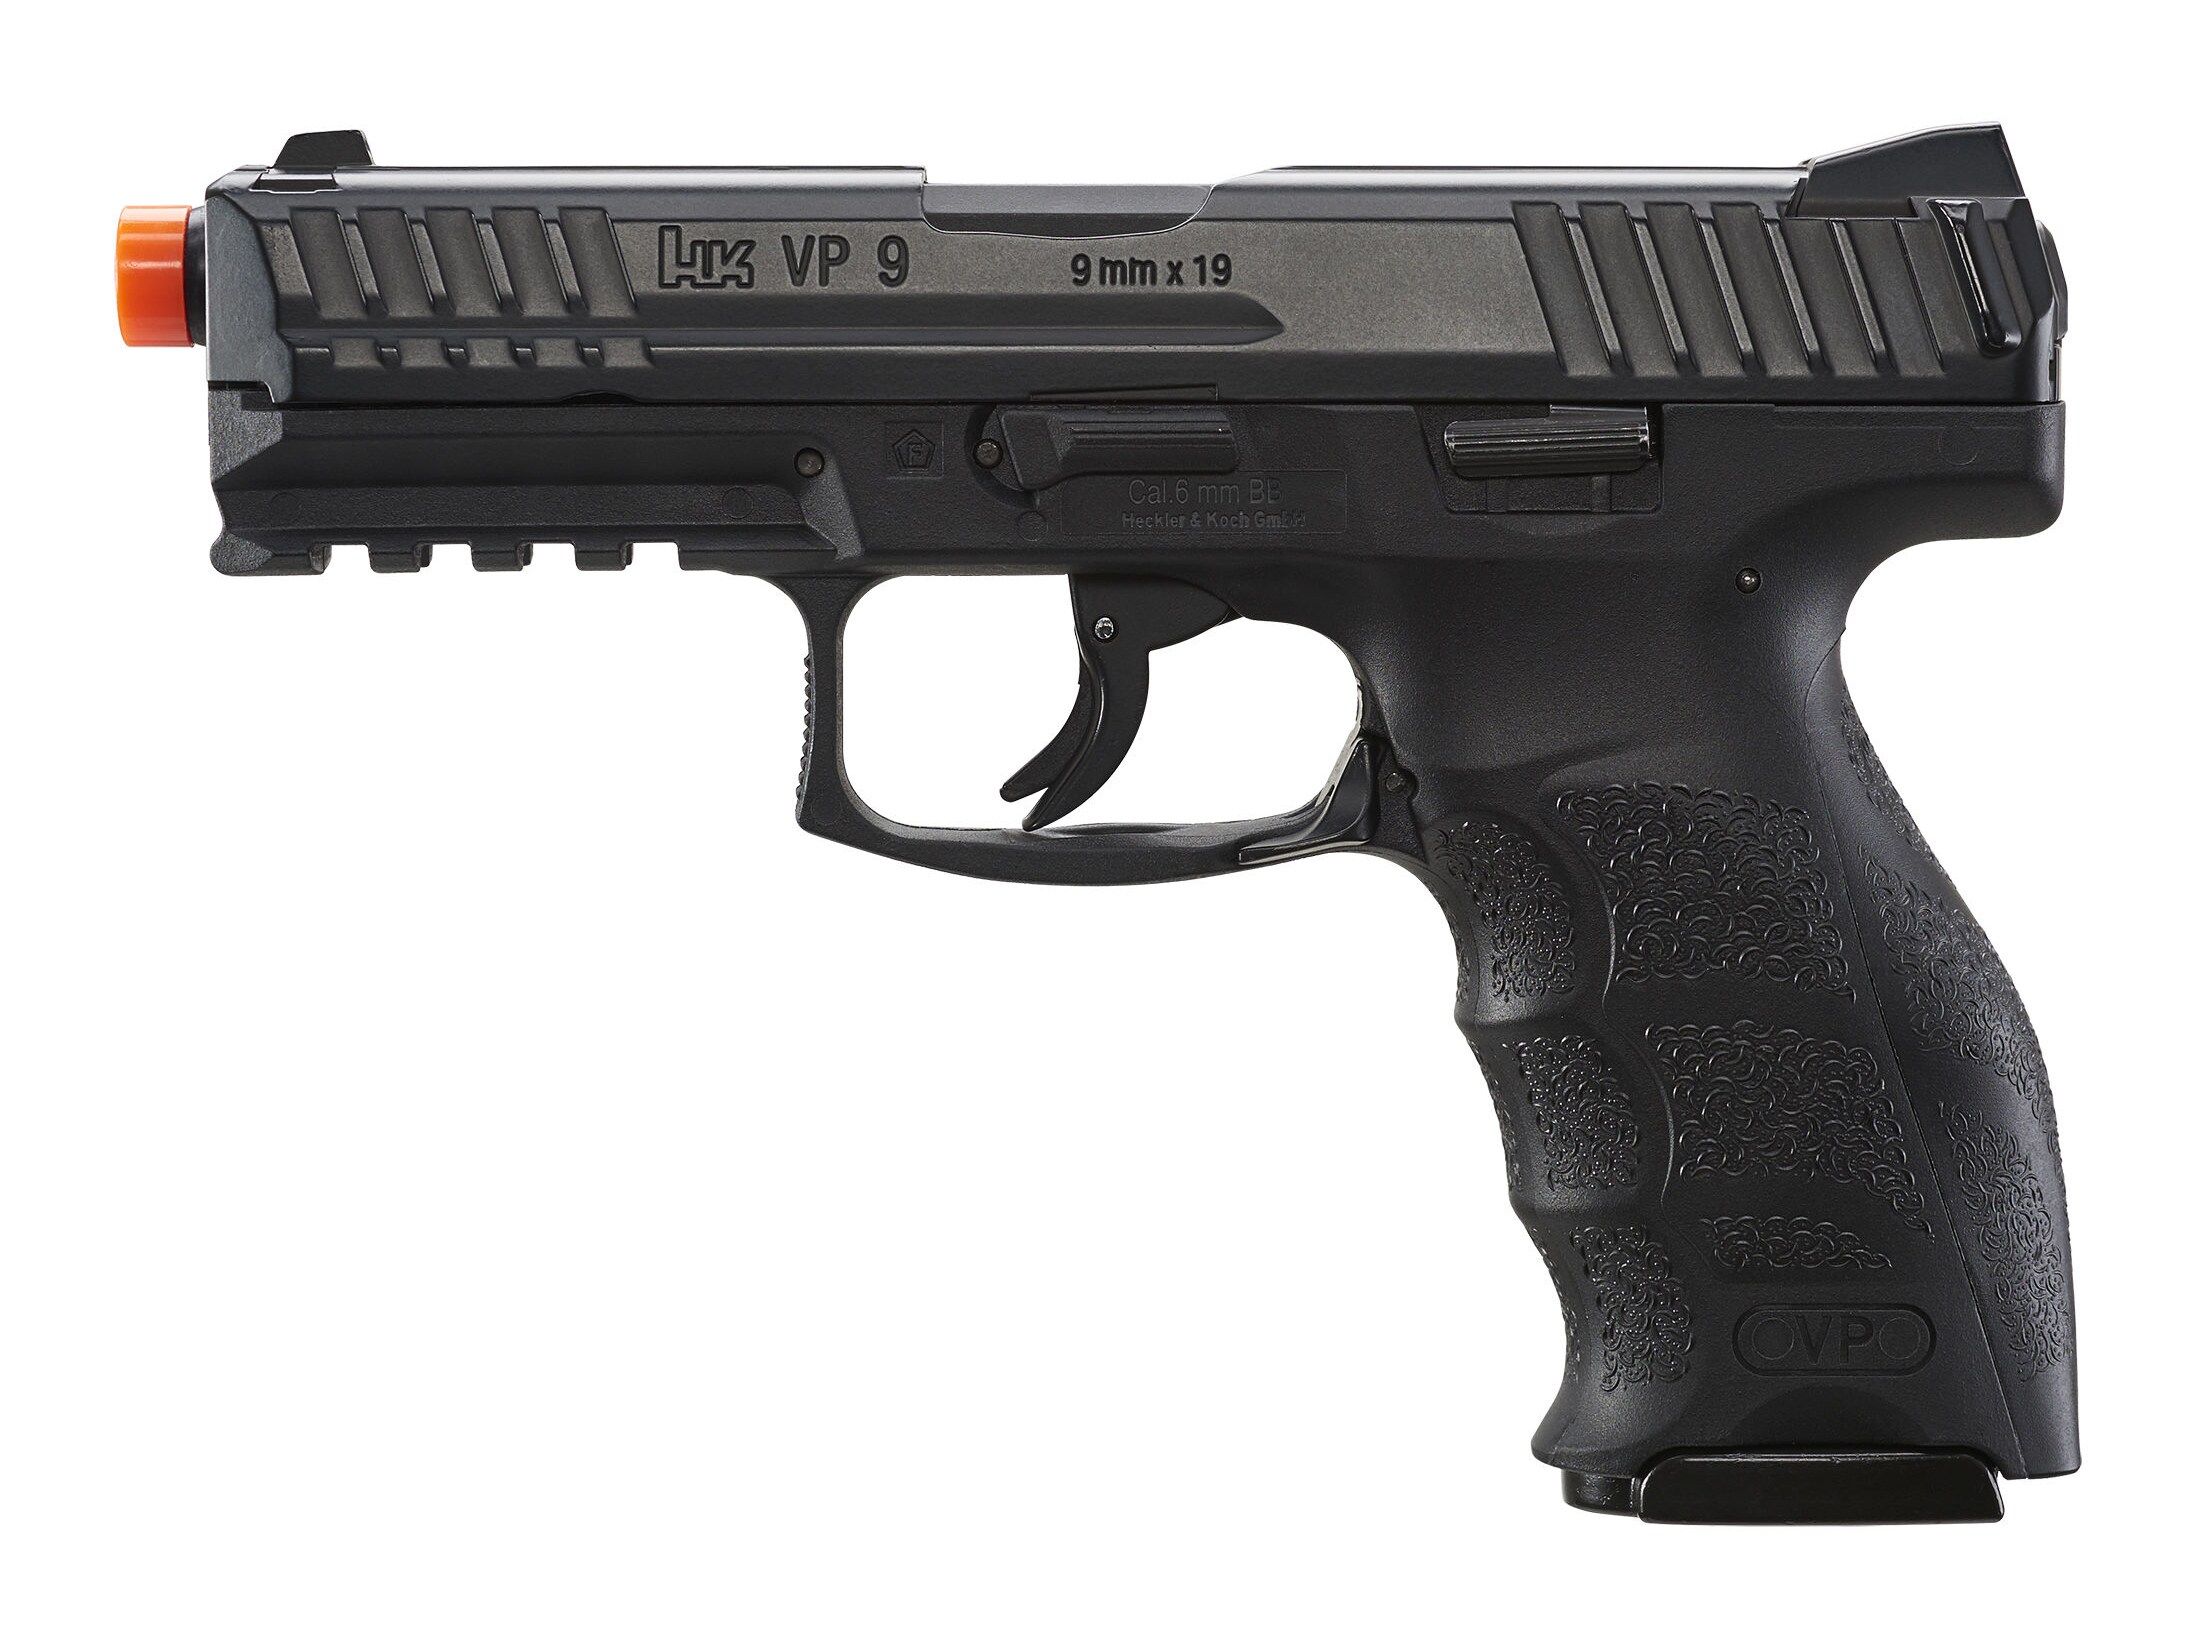 HK VP9 Airsoft Pistol 6mm BB CO2 Powered Semi-Automatic Black For Sale